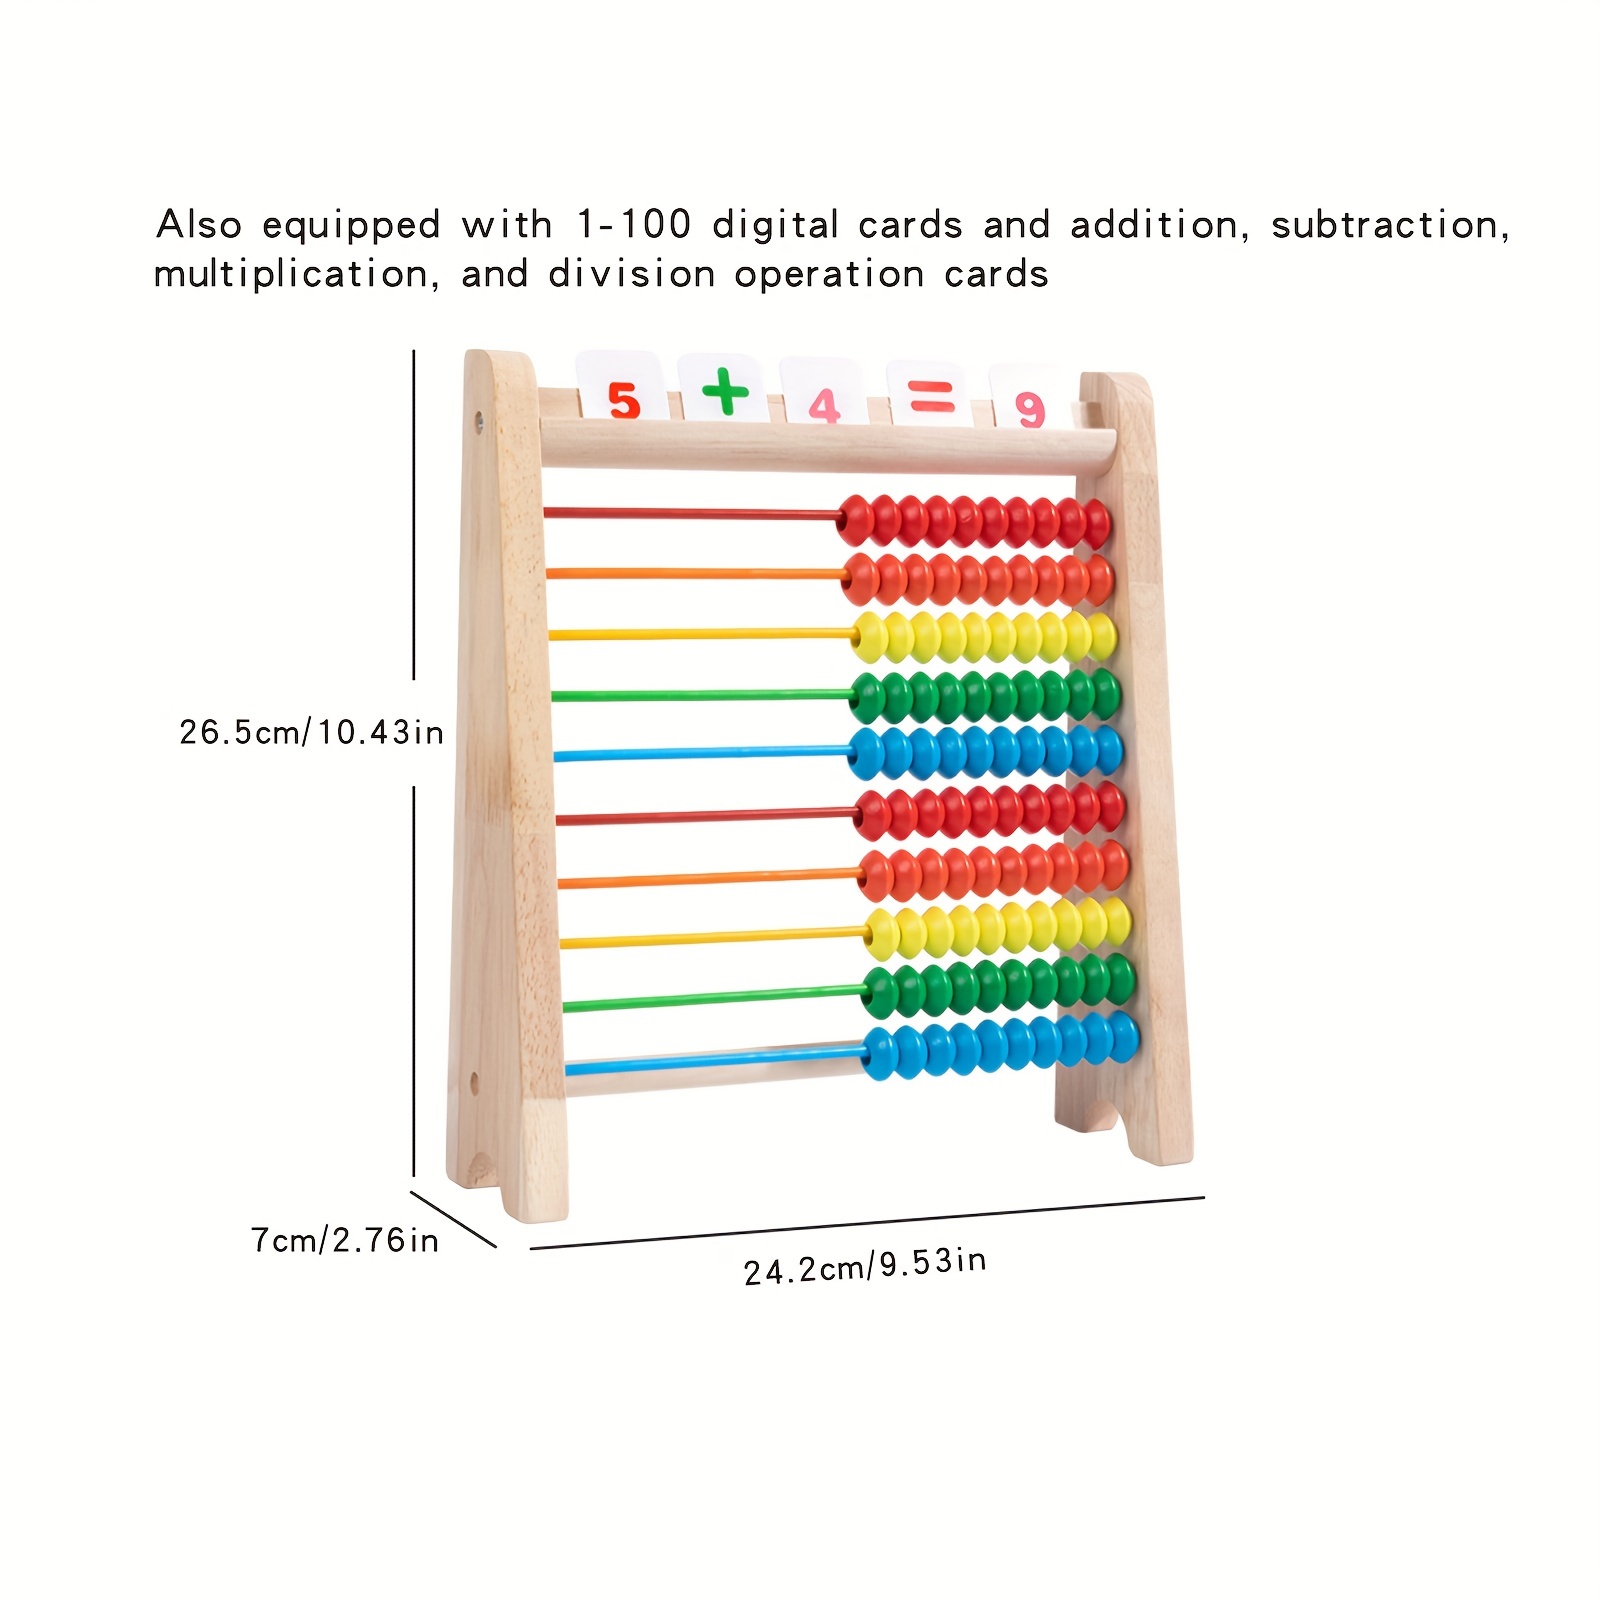 Wooden Abacus Maths Games With 100 Beads For Kids